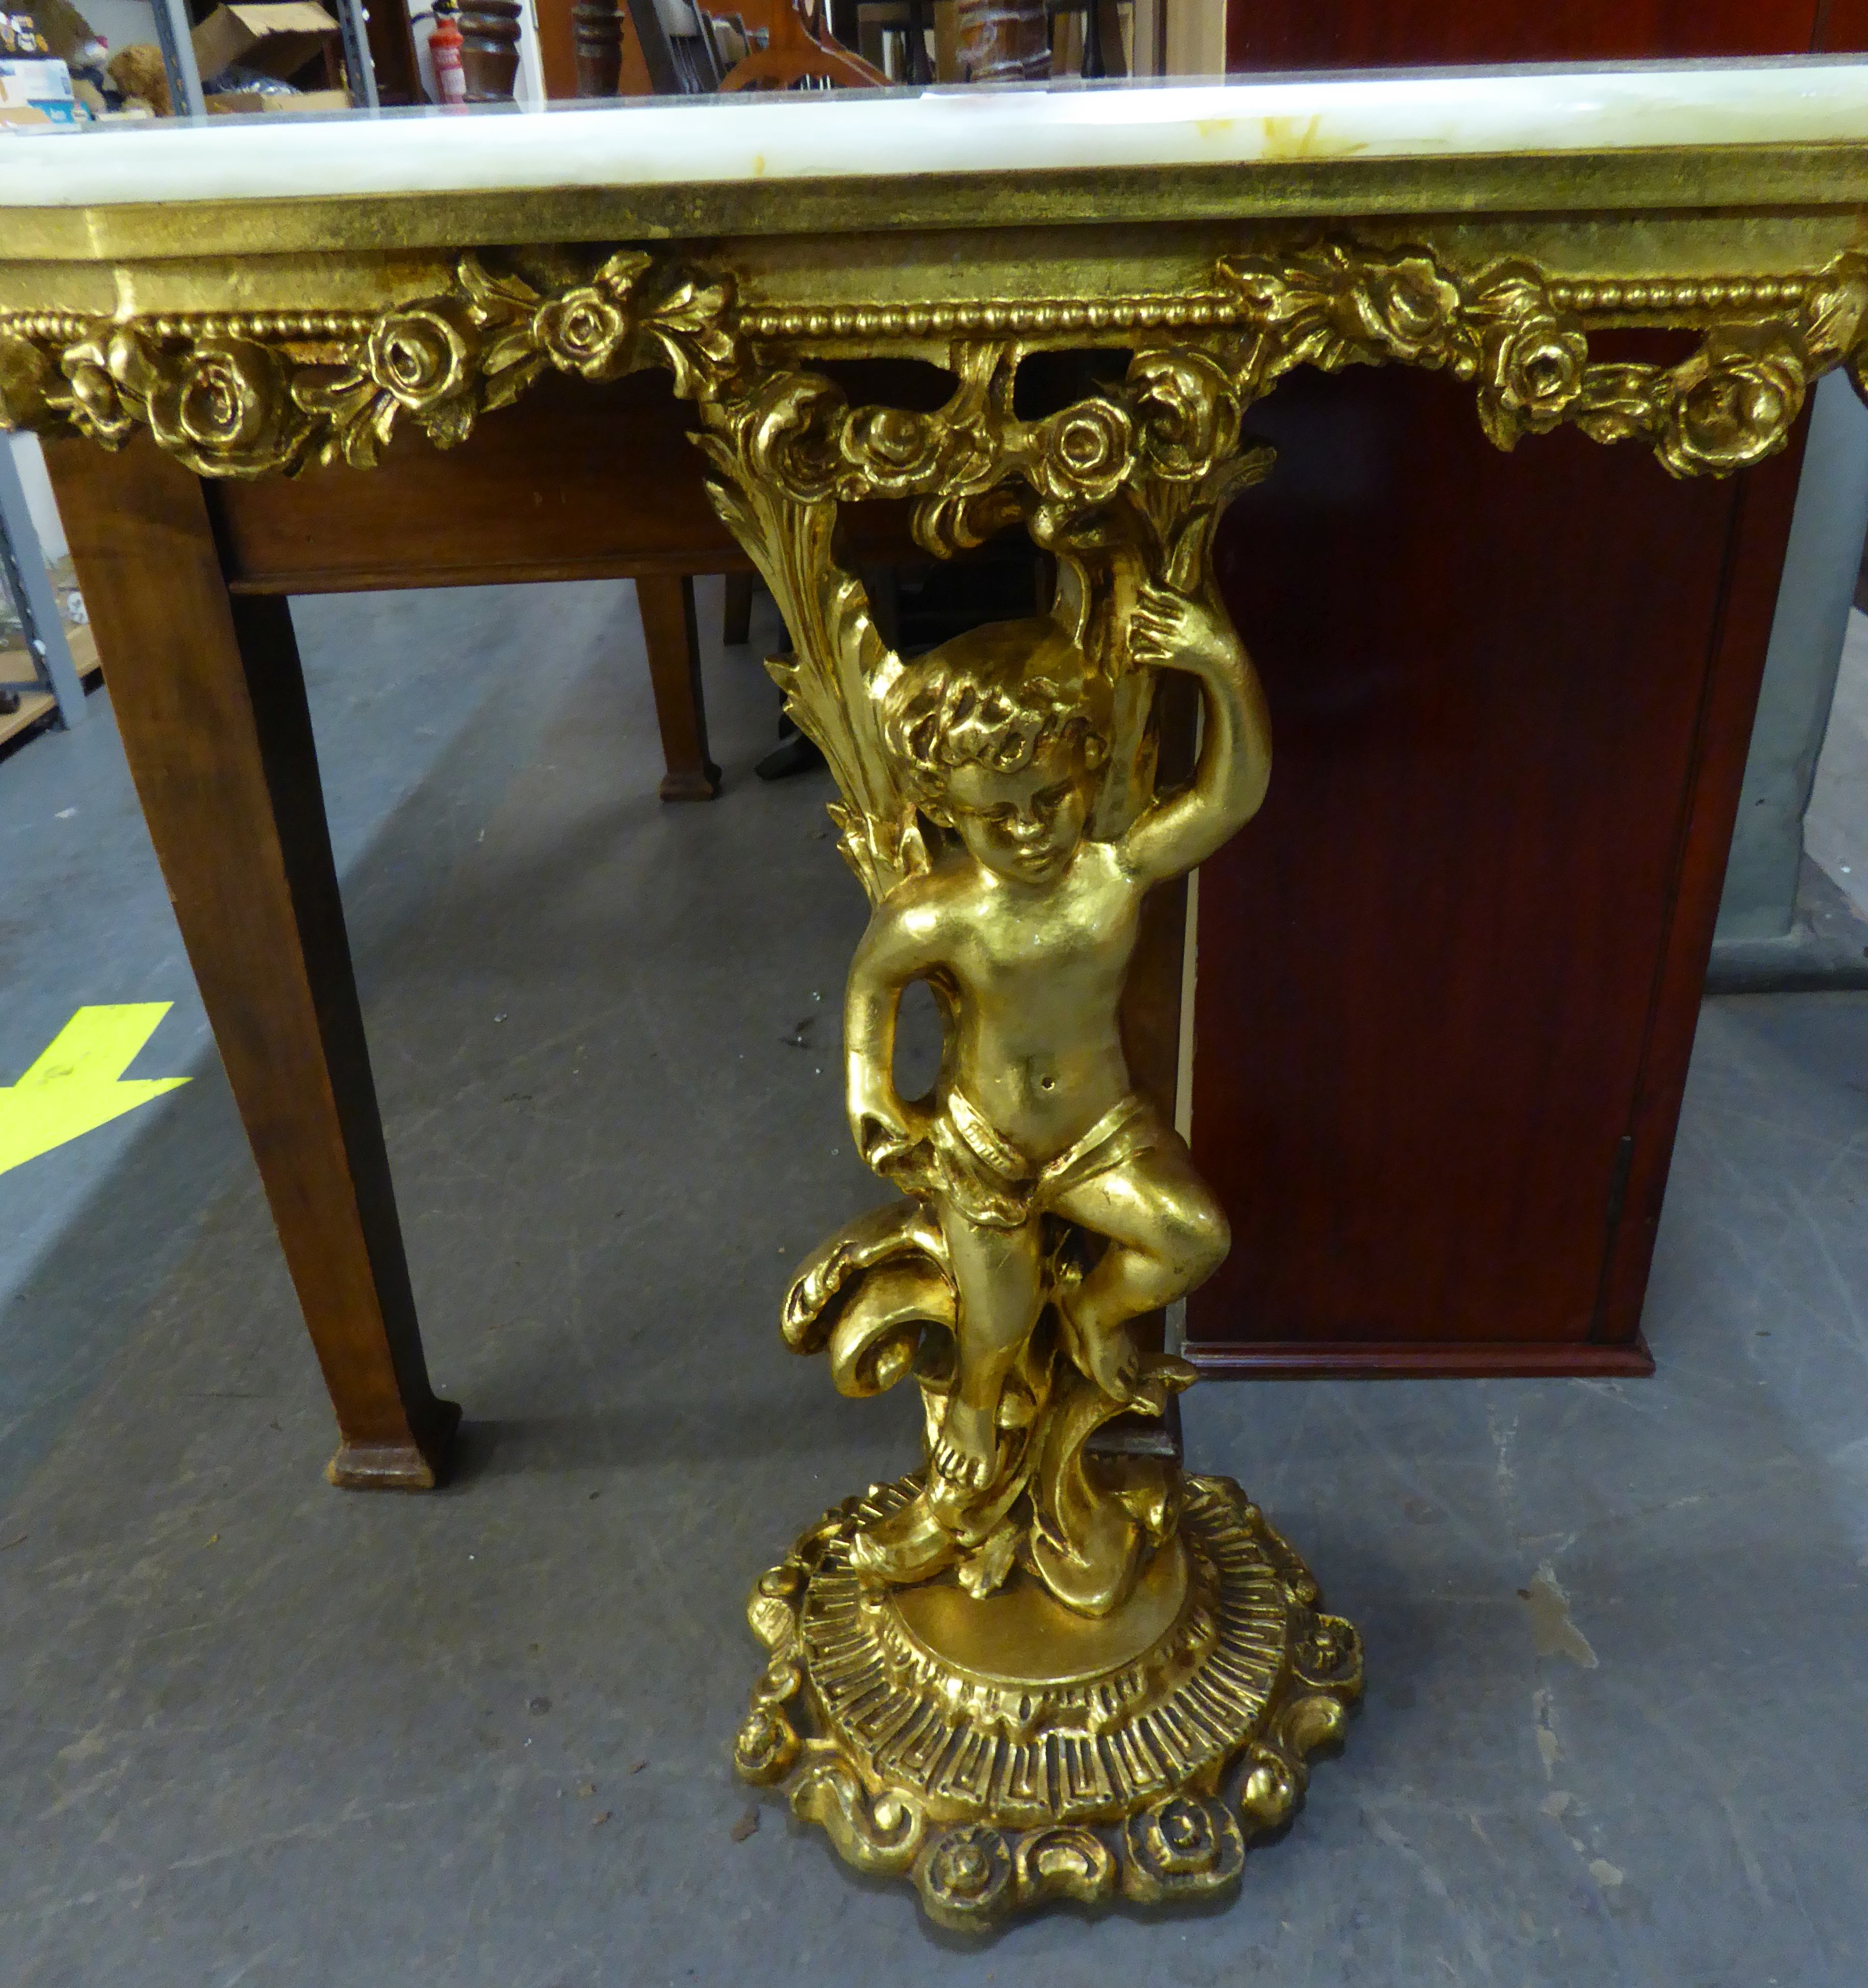 A GILT-WOOD CONSOLE TABLE, WITH ONYX TOP, CHERUB COLUMN ON CIRCULAR BASE, 2'8" WIDE - Image 2 of 2